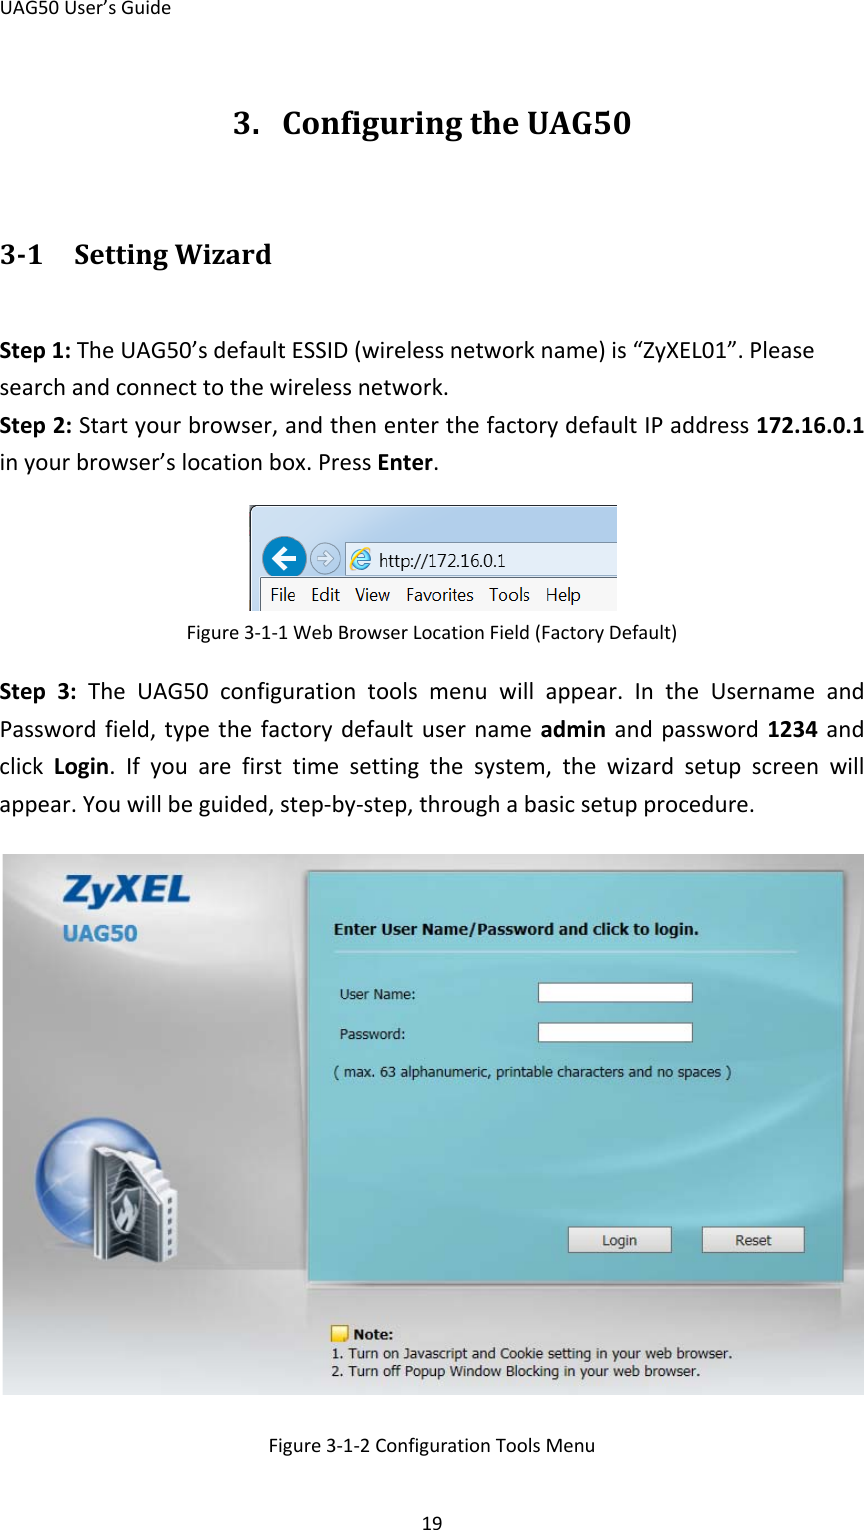 UAG50 User’s Guide 19 3. Configuring the UAG50 3-1 Setting Wizard Step 1: The UAG50’s default ESSID (wireless network name) is “ZyXEL01”. Please search and connect to the wireless network. Step 2: Start your browser, and then enter the factory default IP address 172.16.0.1 in your browser’s location box. Press Enter.  Figure 3-1-1 Web Browser Location Field (Factory Default) Step  3:  The  UAG50 configuration tools menu will appear. In the Username and Password field, type the factory default user name admin  and password 1234 and click Login. If you are first time setting the system, the wizard setup screen will appear. You will be guided, step-by-step, through a basic setup procedure.  Figure 3-1-2 Configuration Tools Menu 